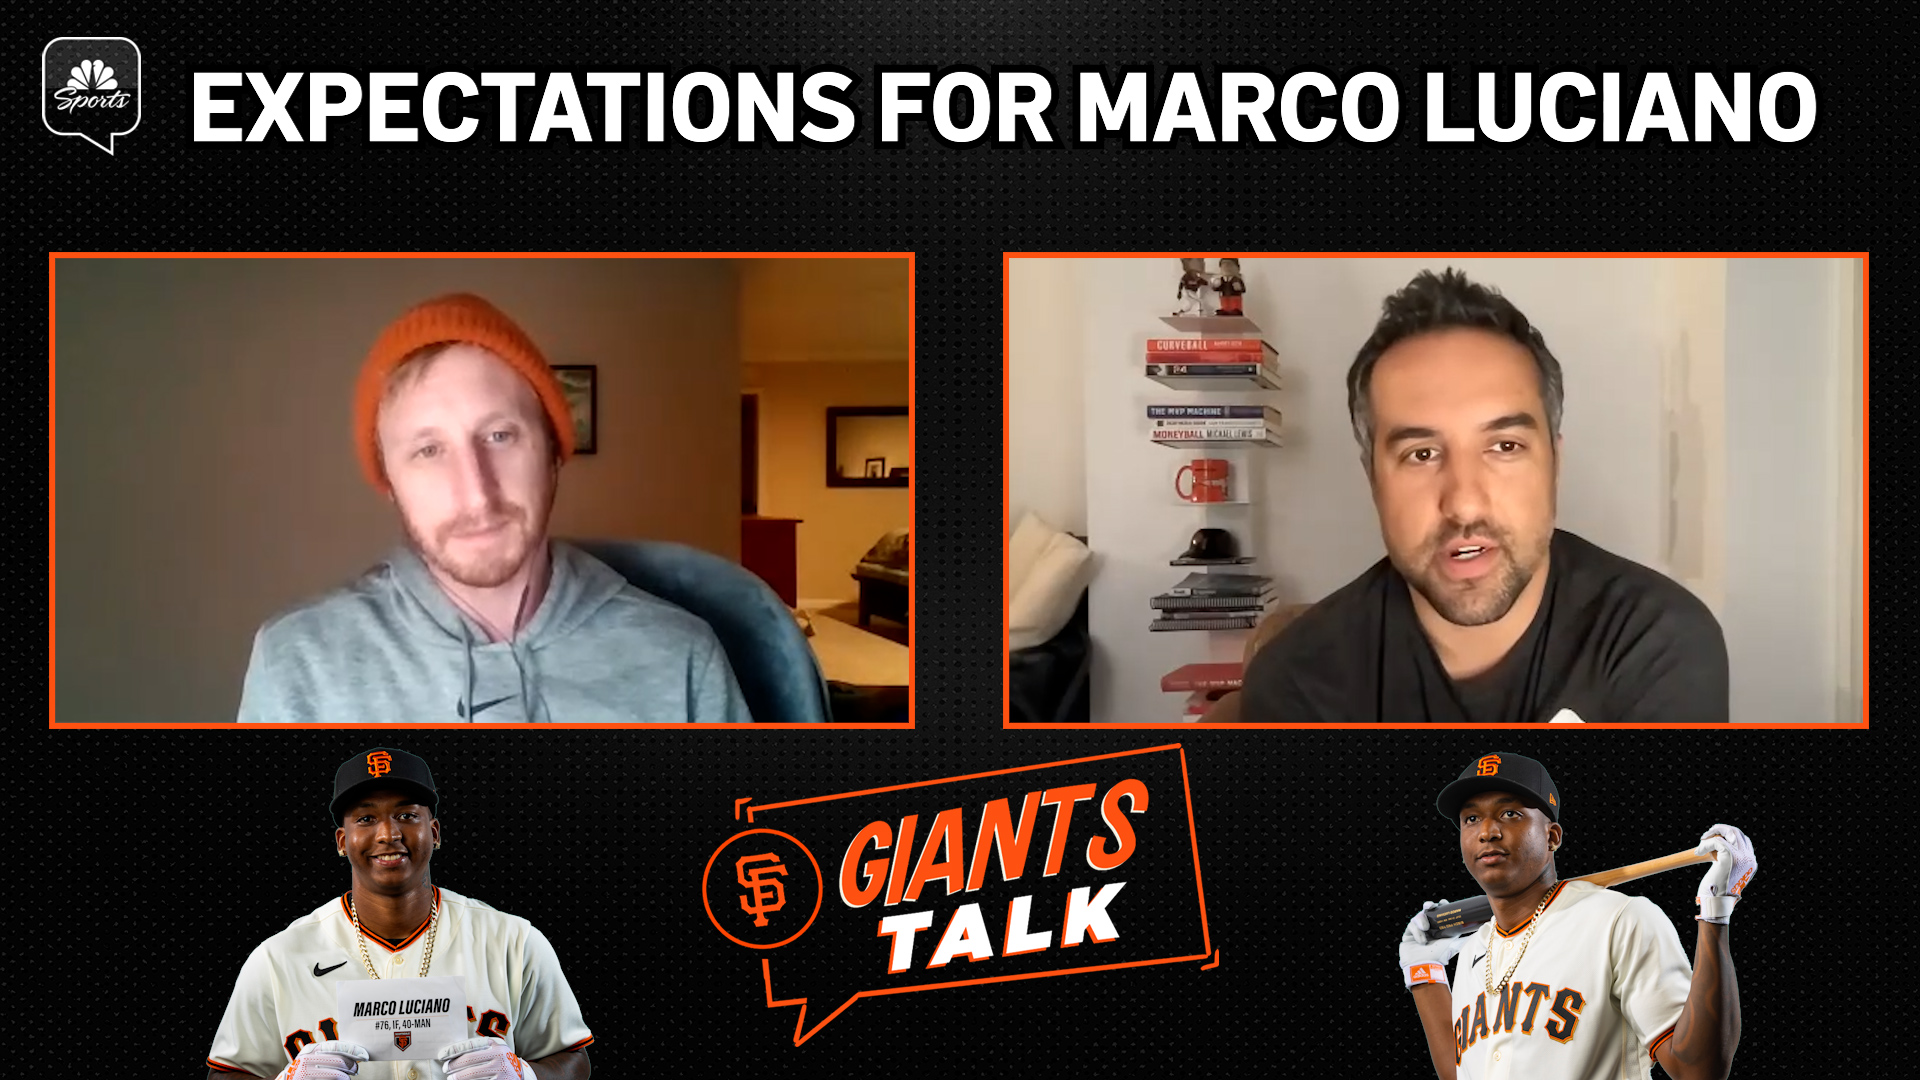 Giants insider doesn't expect Marco Luciano to play in spring